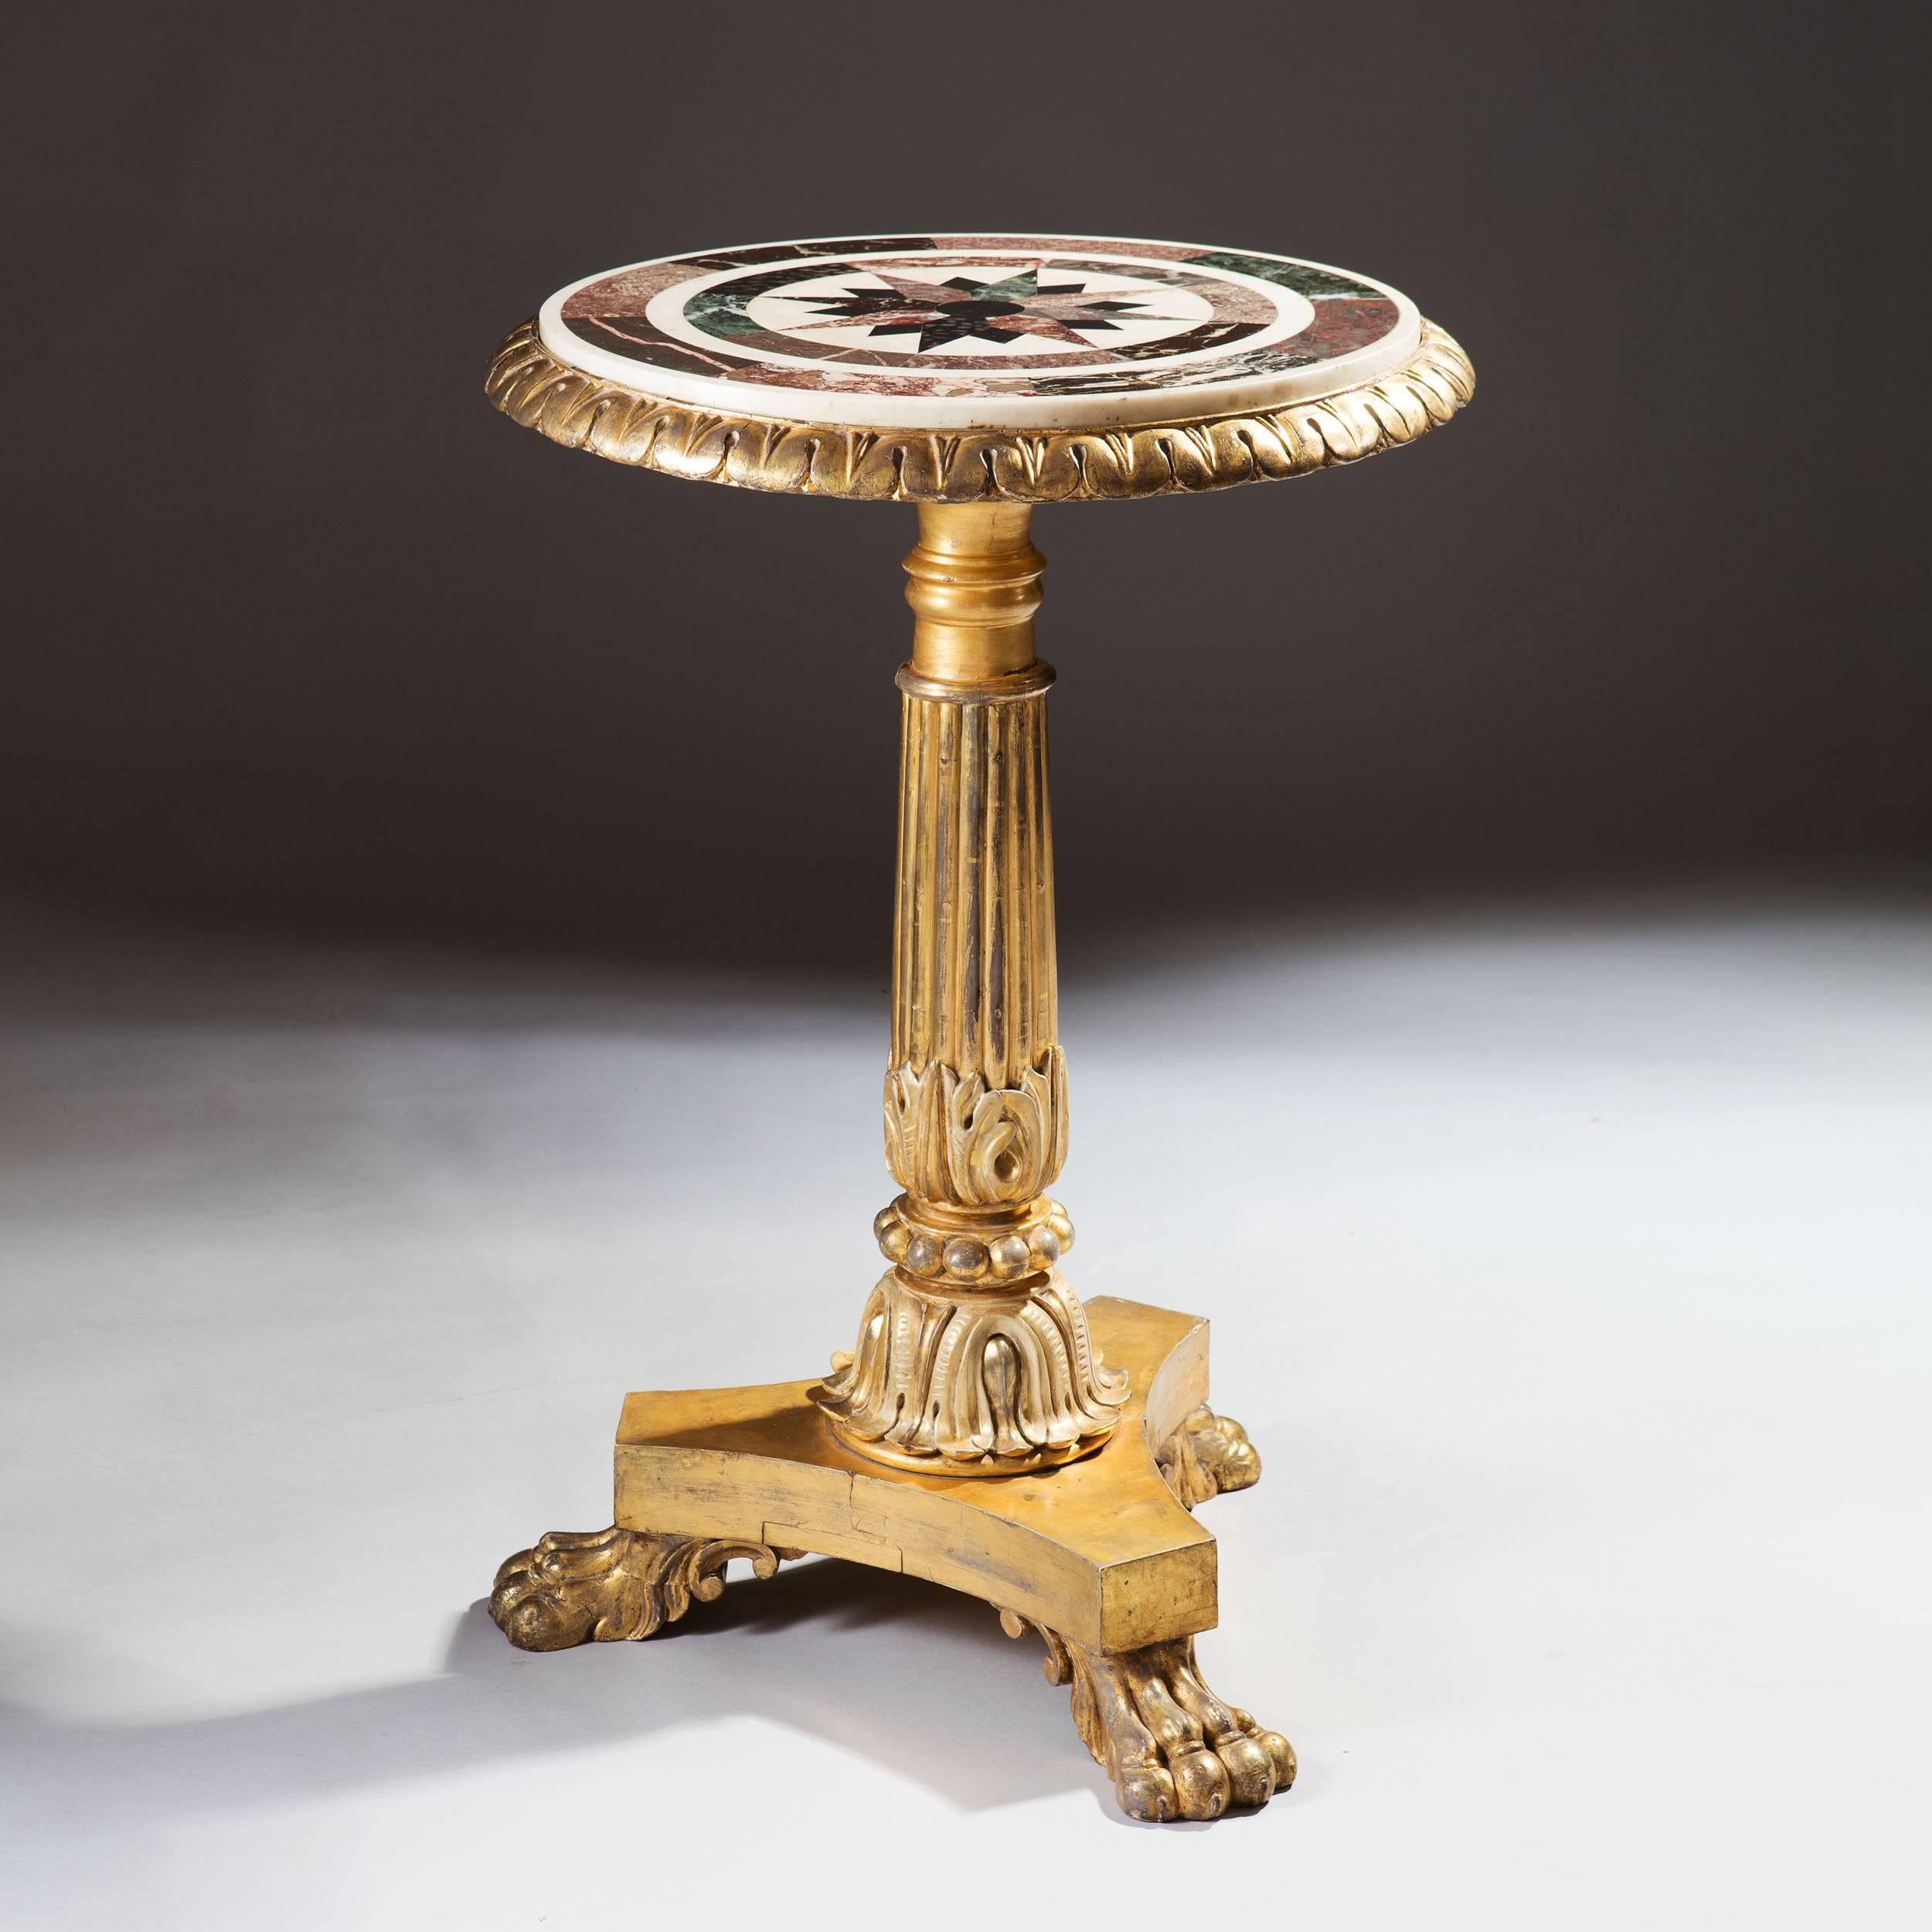 A fine mid-19th century William IV carved giltwood and specimen marble circular occasional table raised on three hairy paw feet,

England, circa 1840. 

Measures: Height 76cm 30in.
​Diameter 52cm 20.5in.